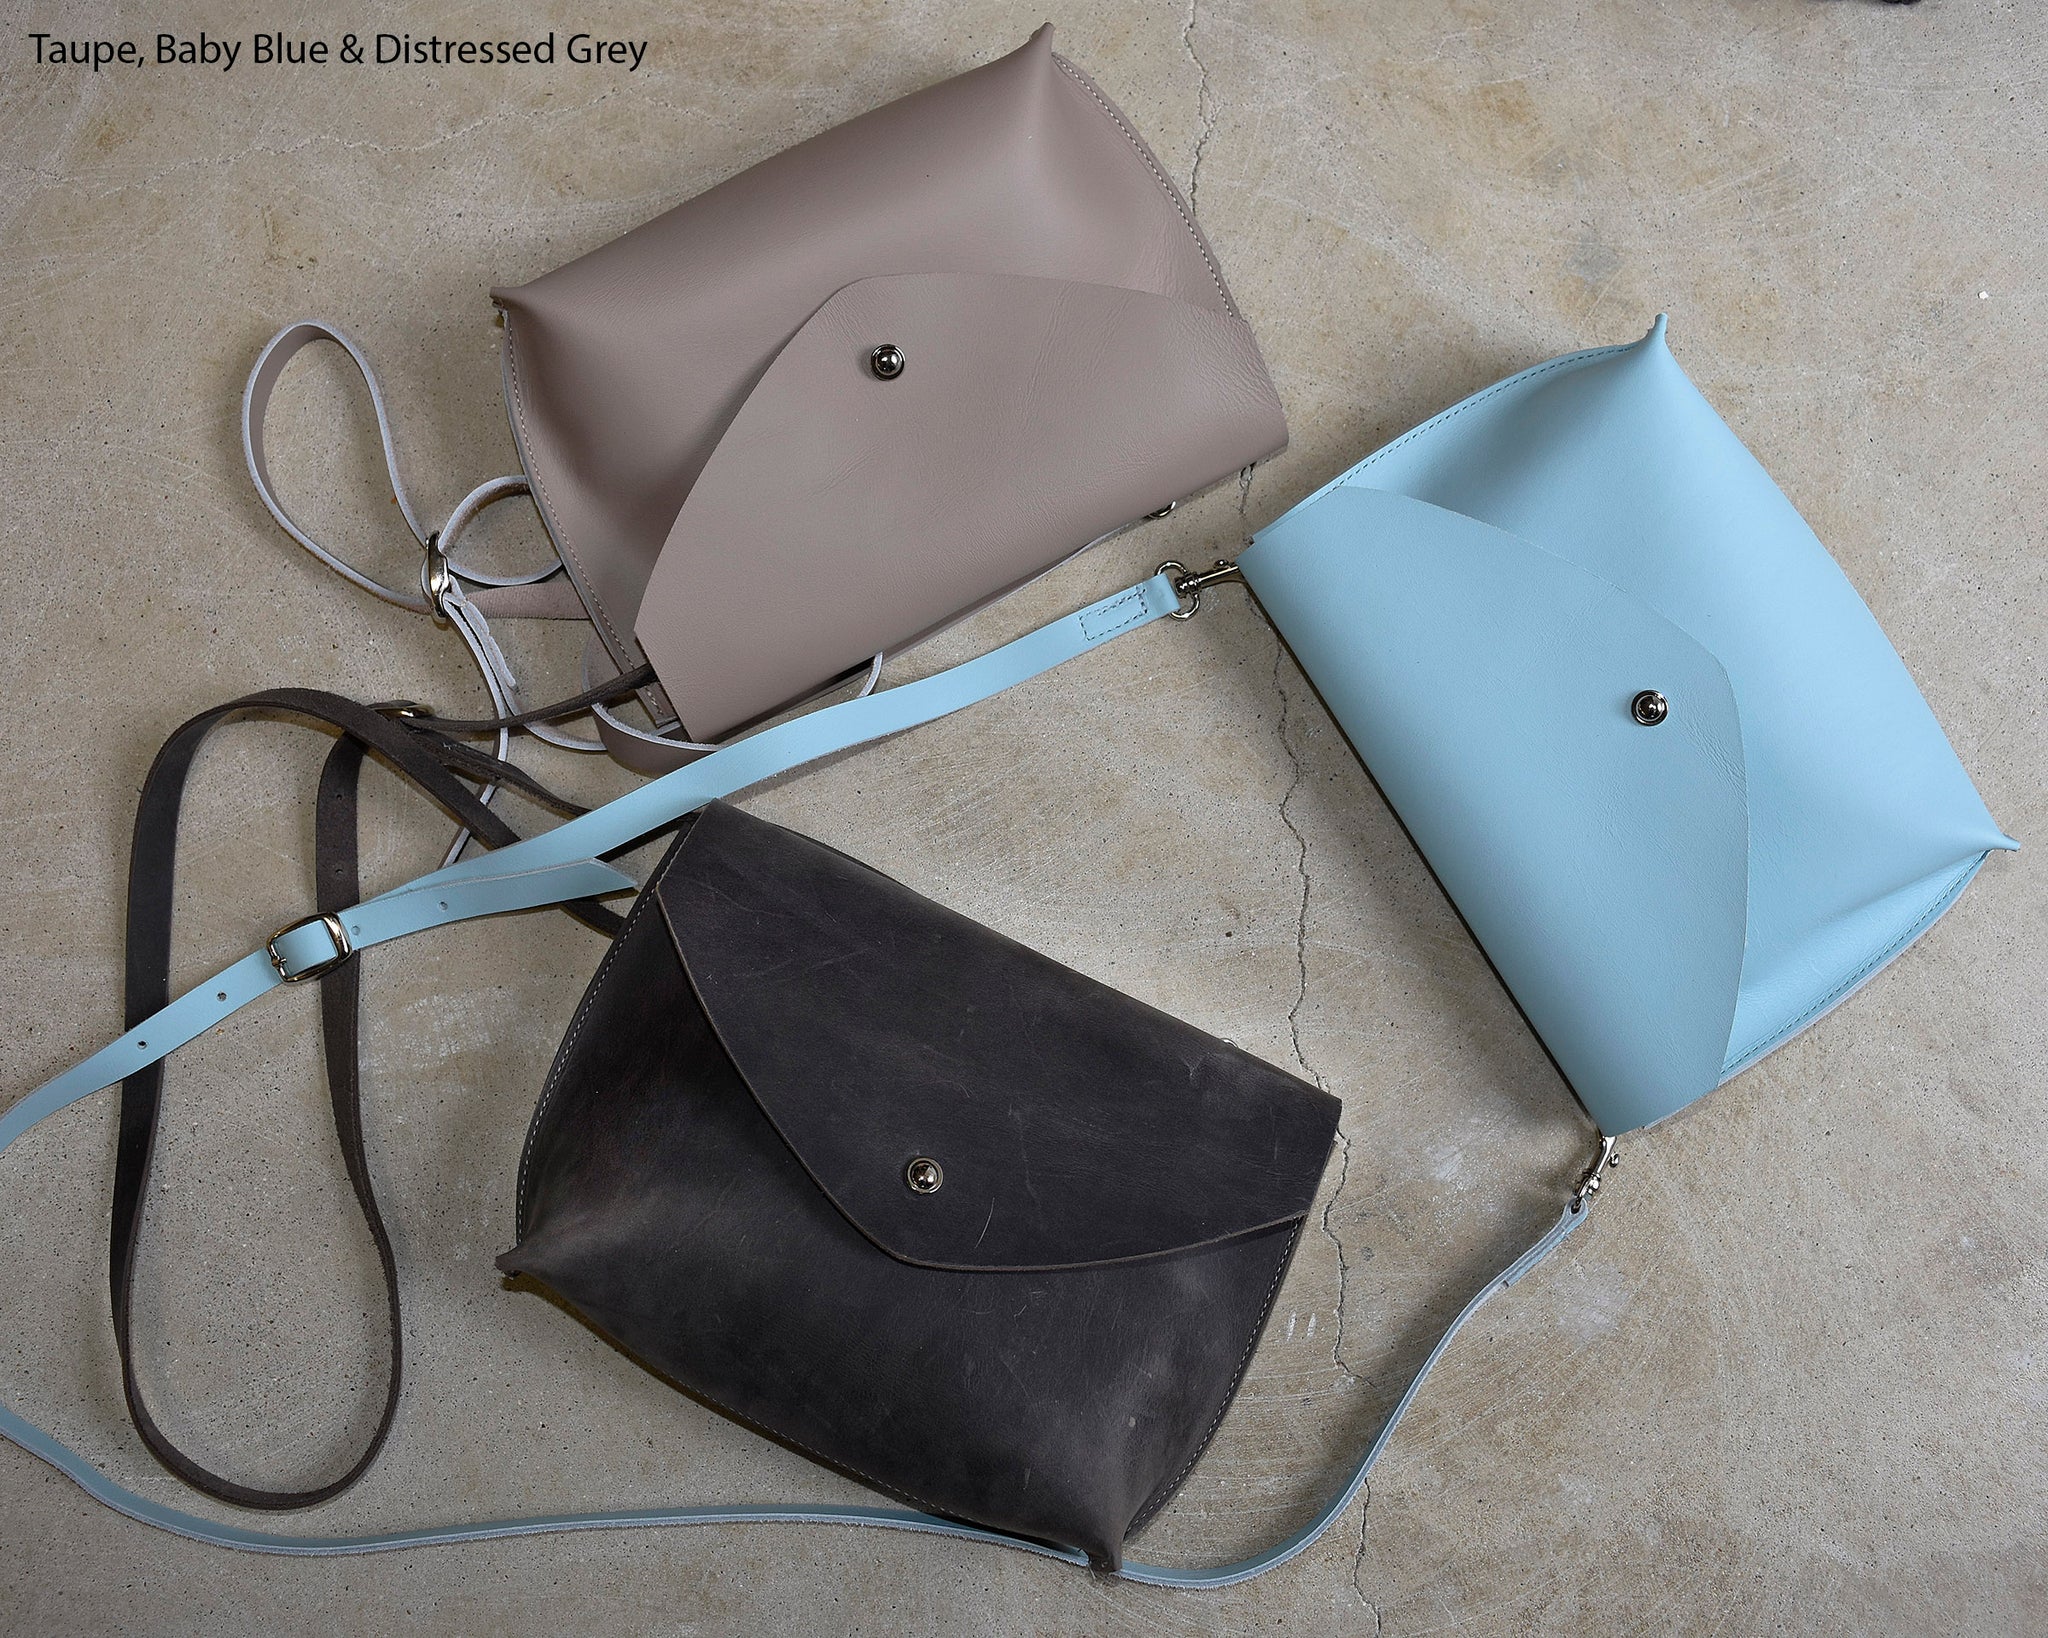 Mexican Leather Envelope Crossbody Bag